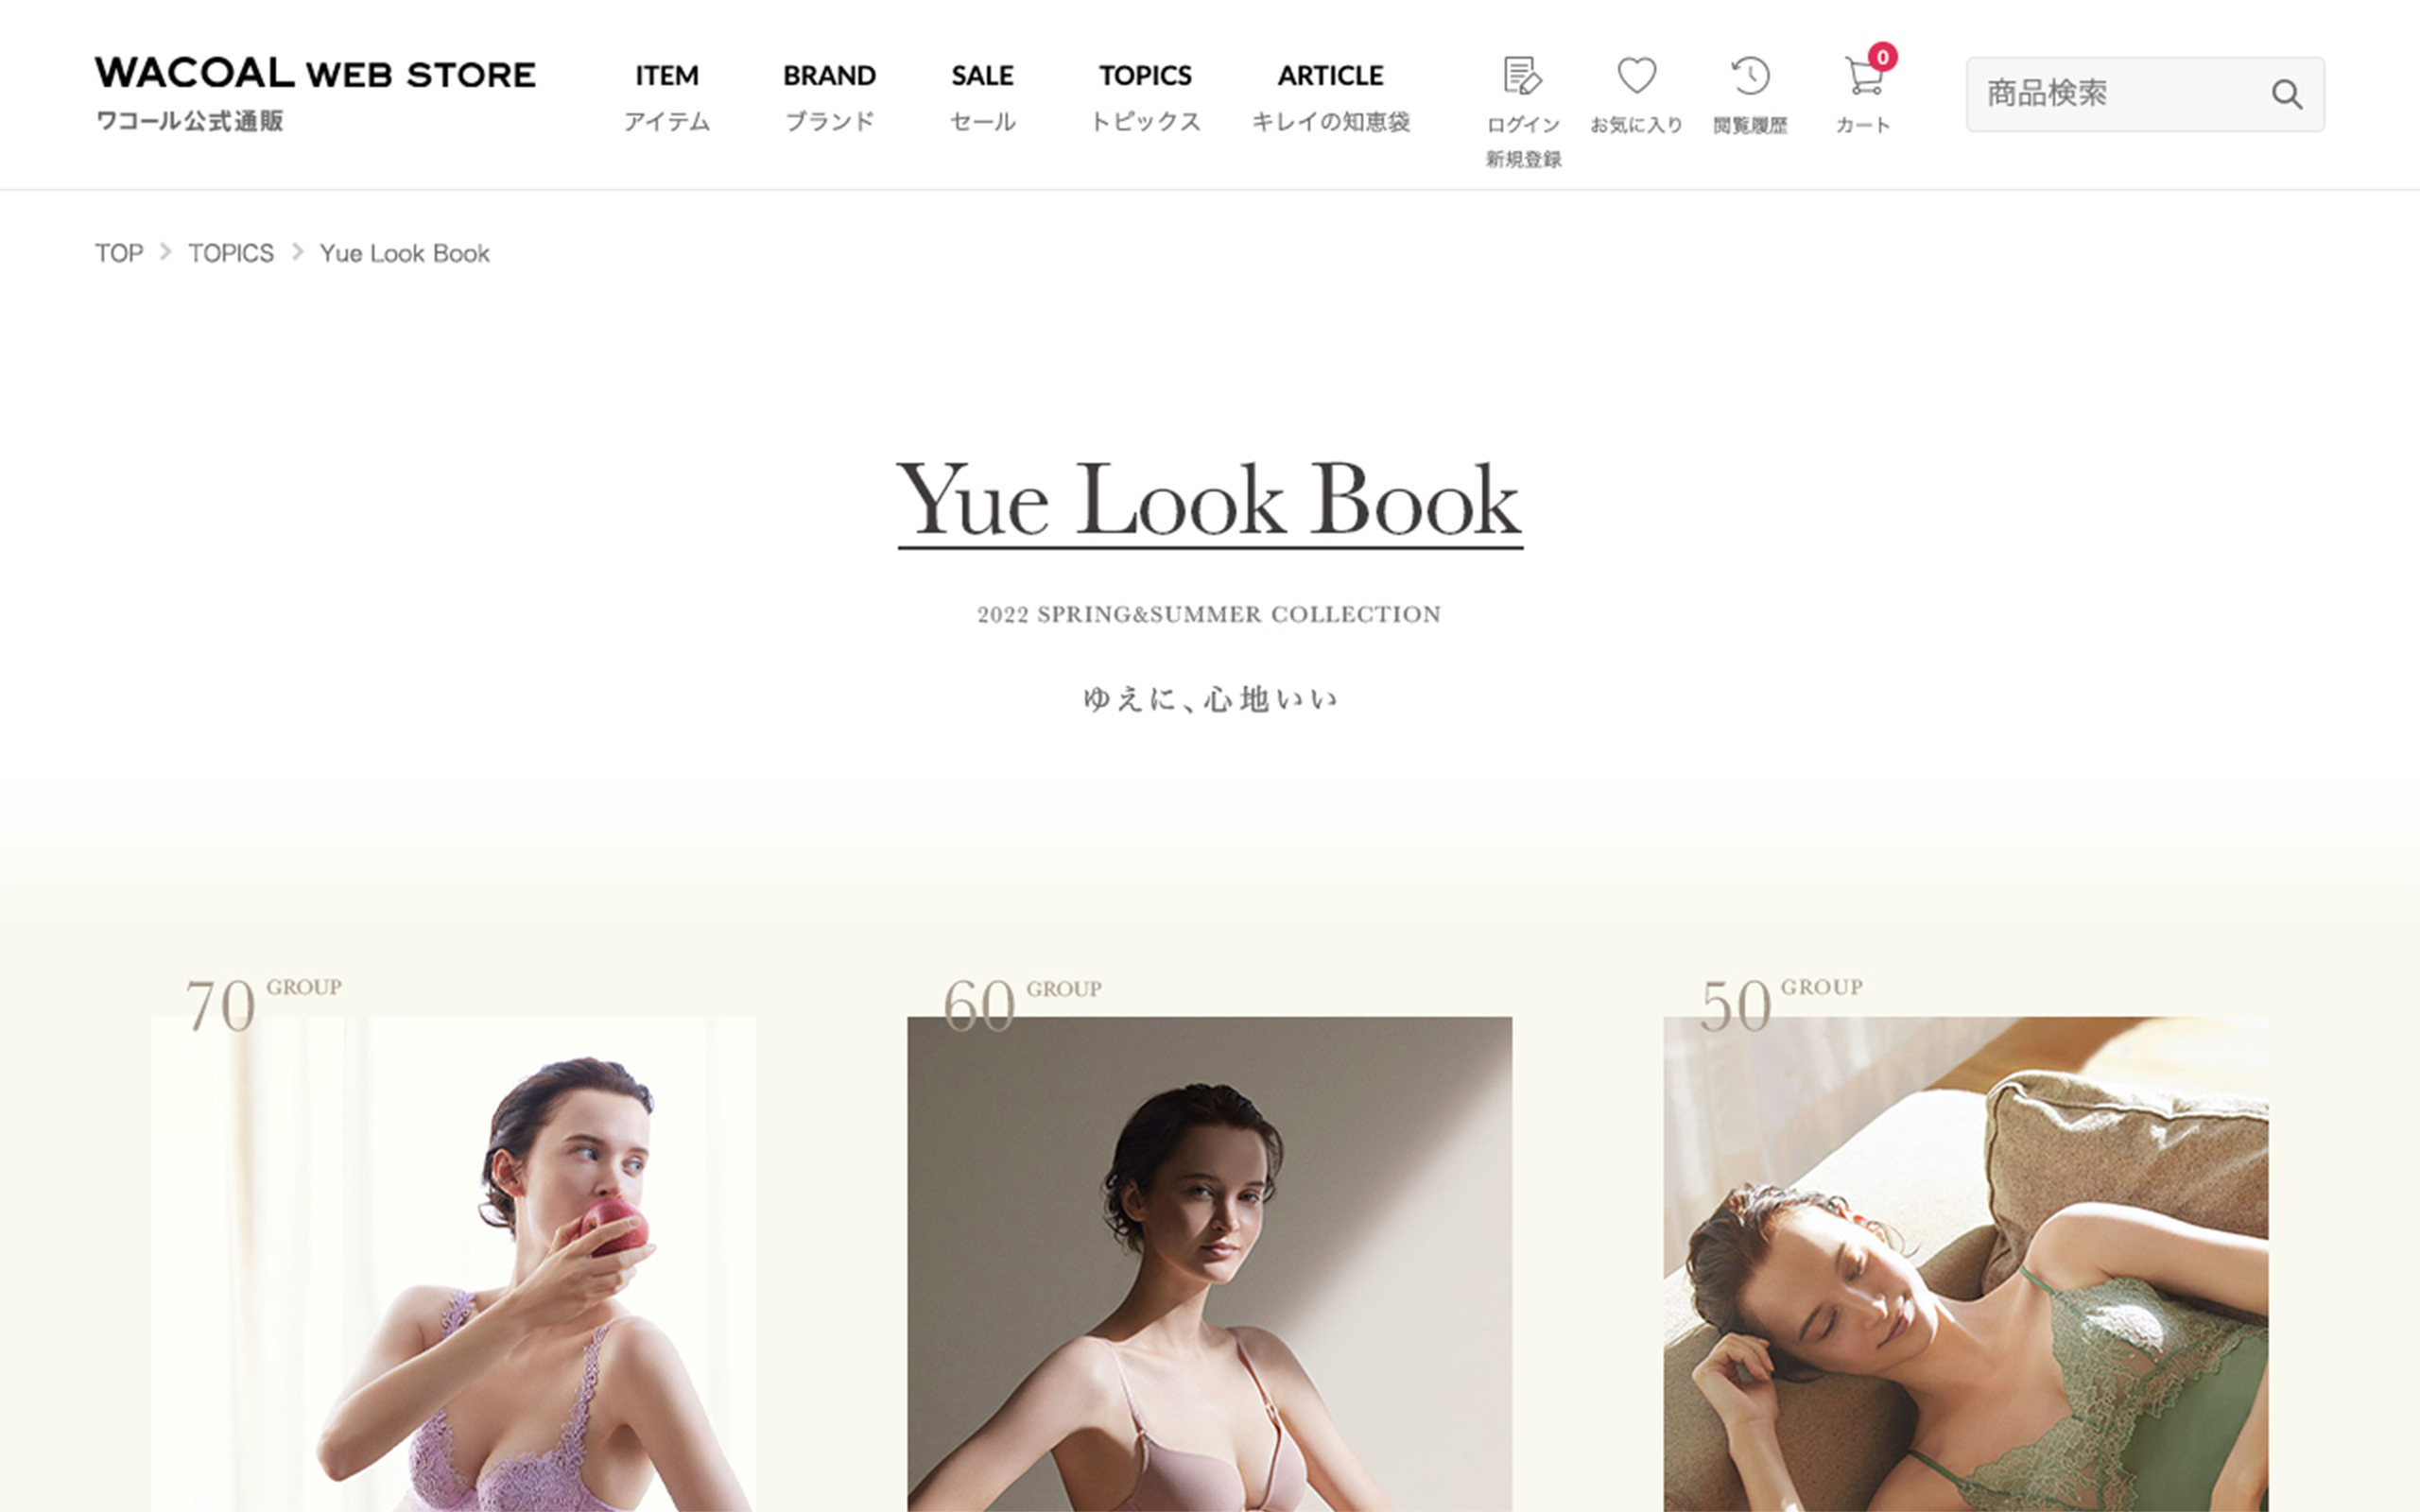 Yue Look Book 22SS